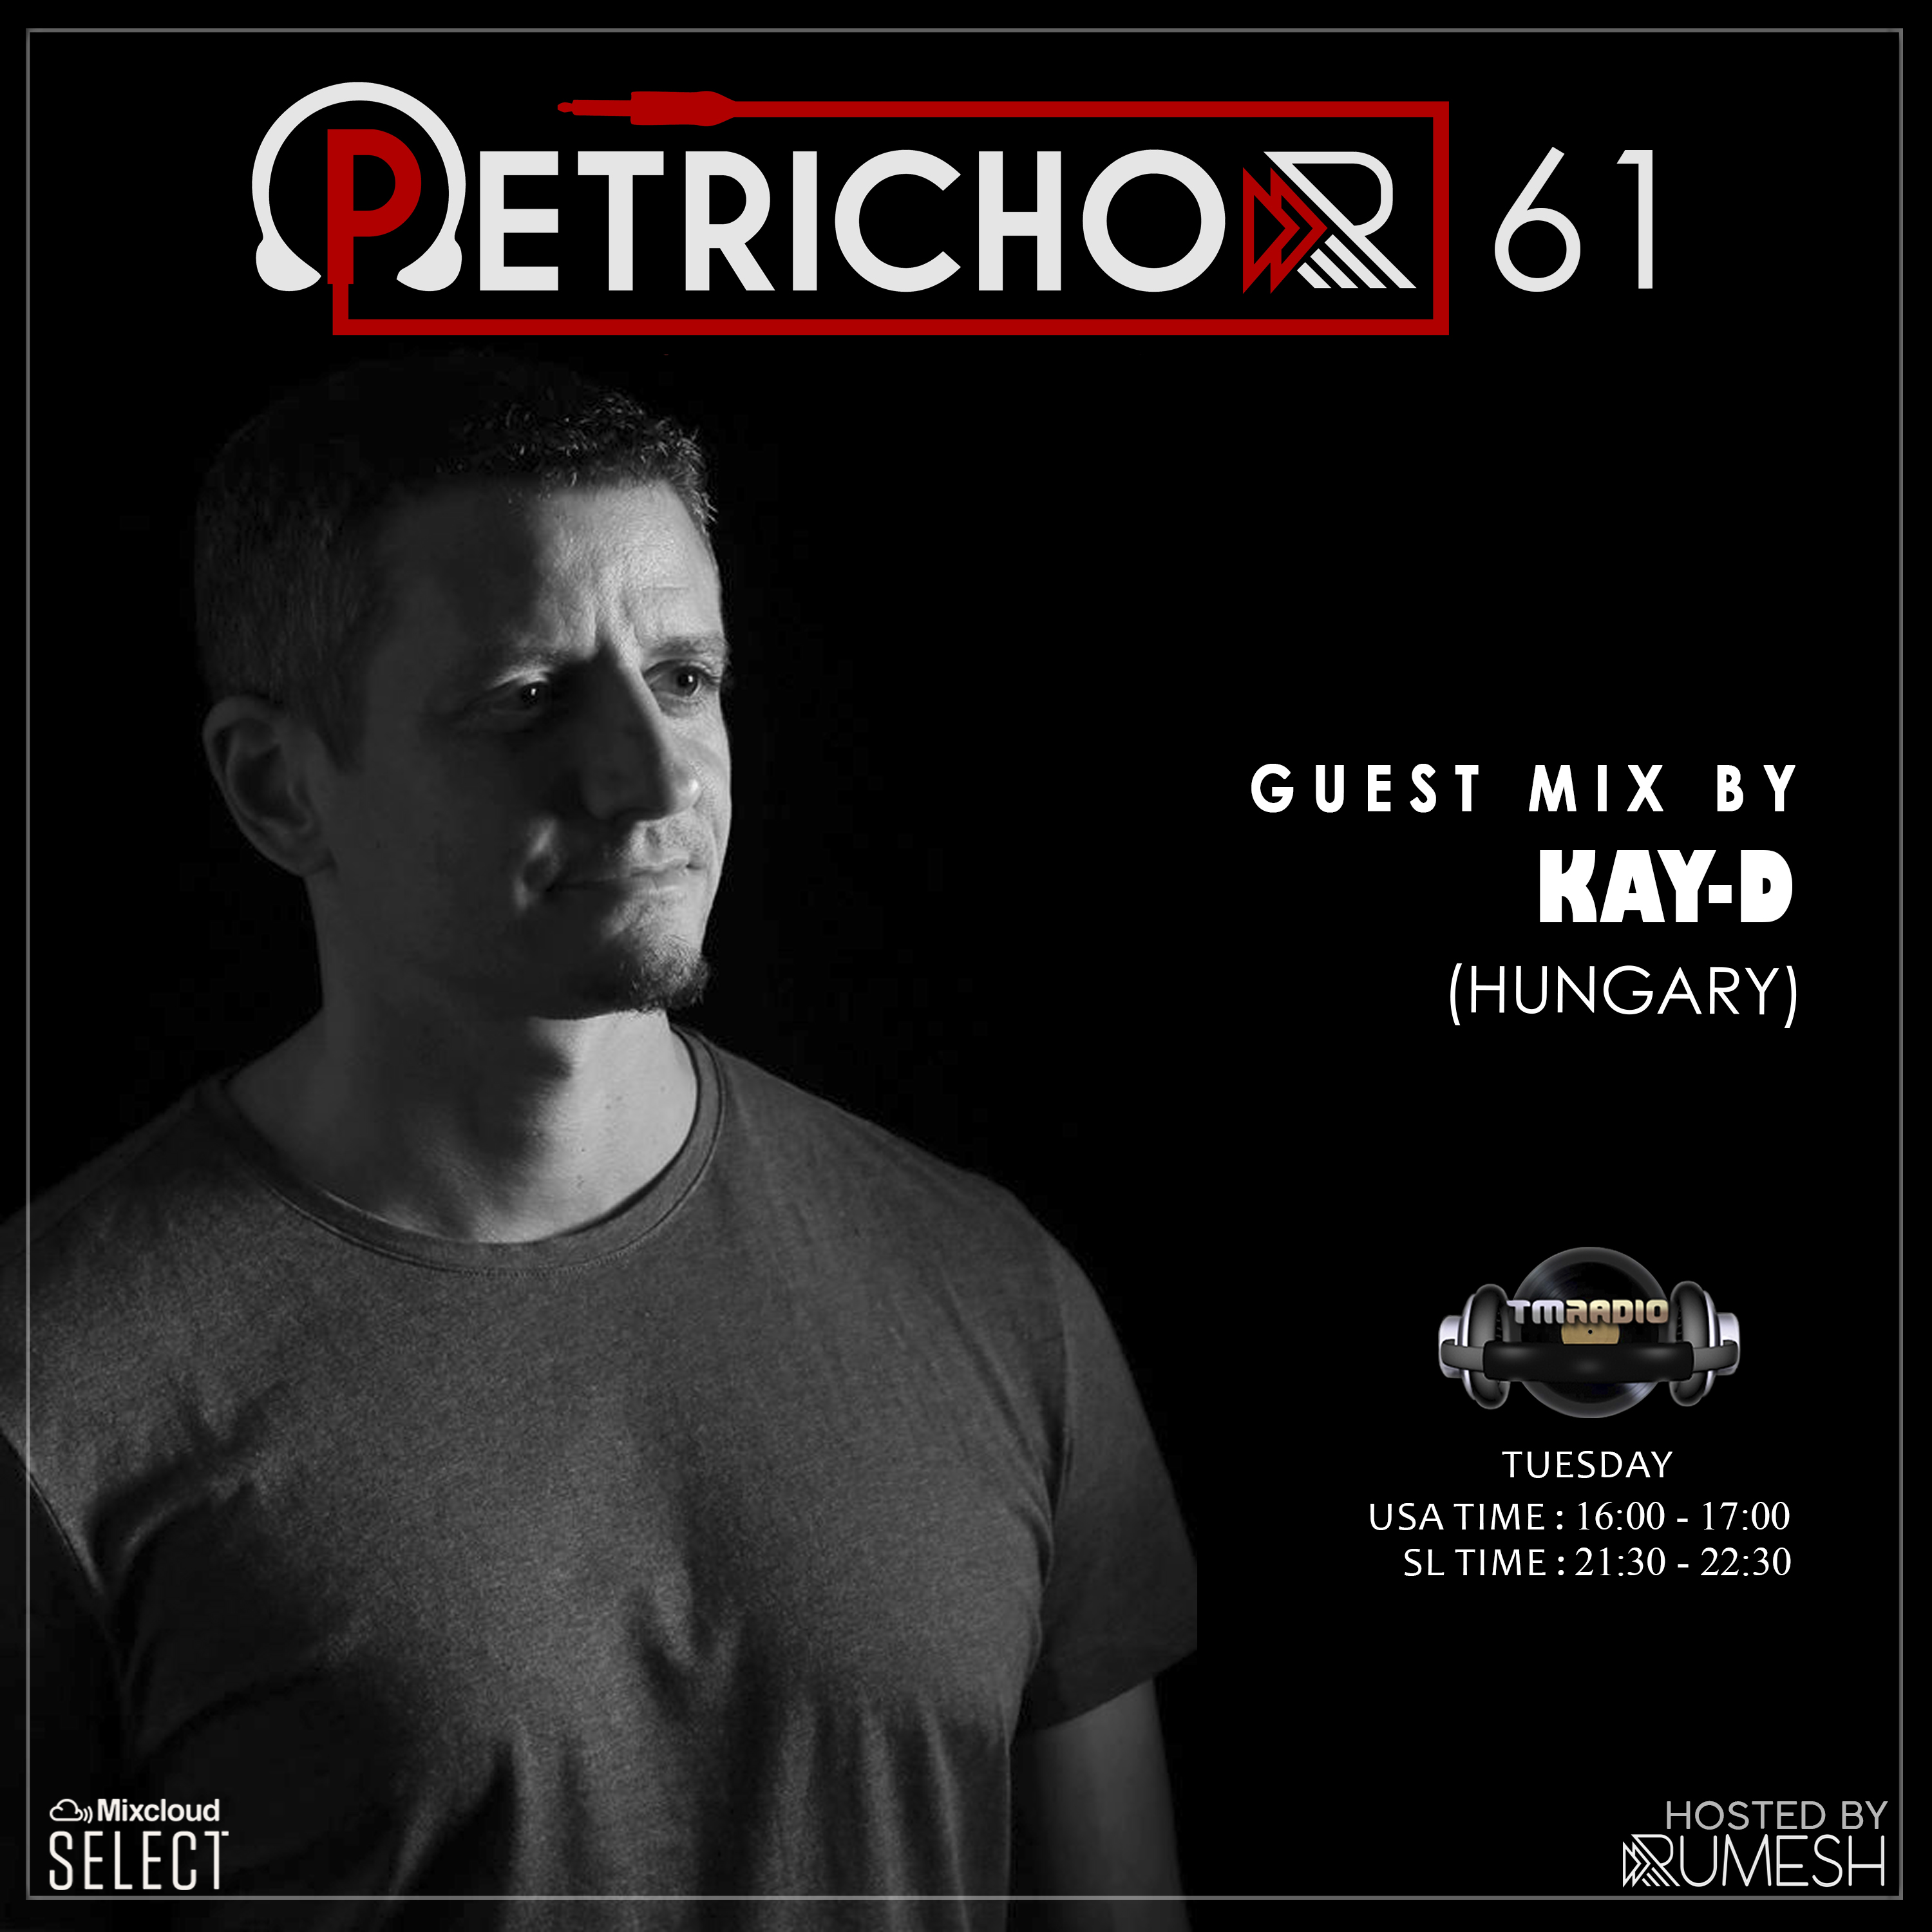 Petrichor :: Petrichor 61 guest mix by Kay-D (Hungary) (aired on January 7th, 2020) banner logo